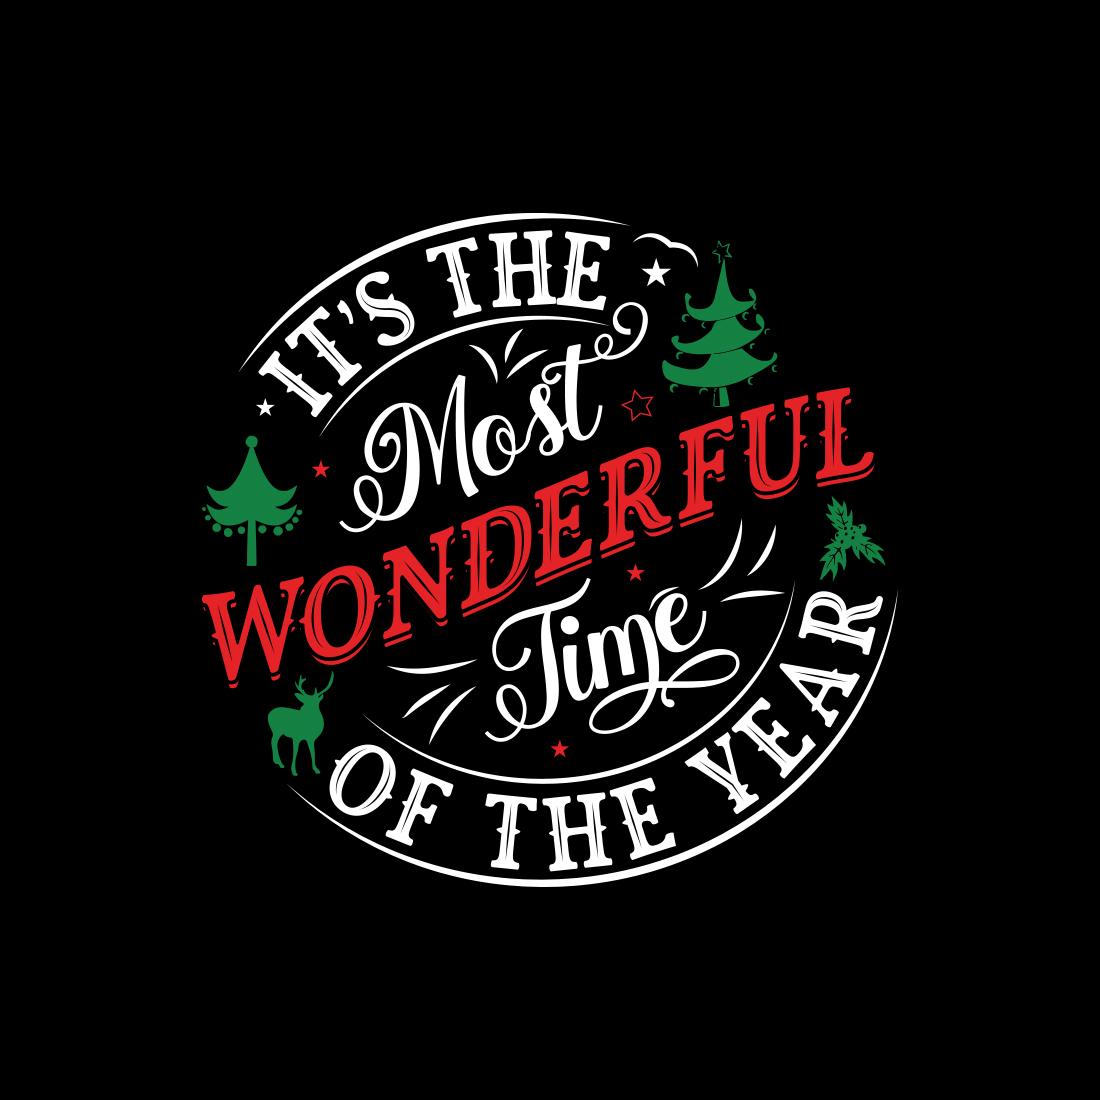 It's the most wonderful time of the year T-shirt design preview image.